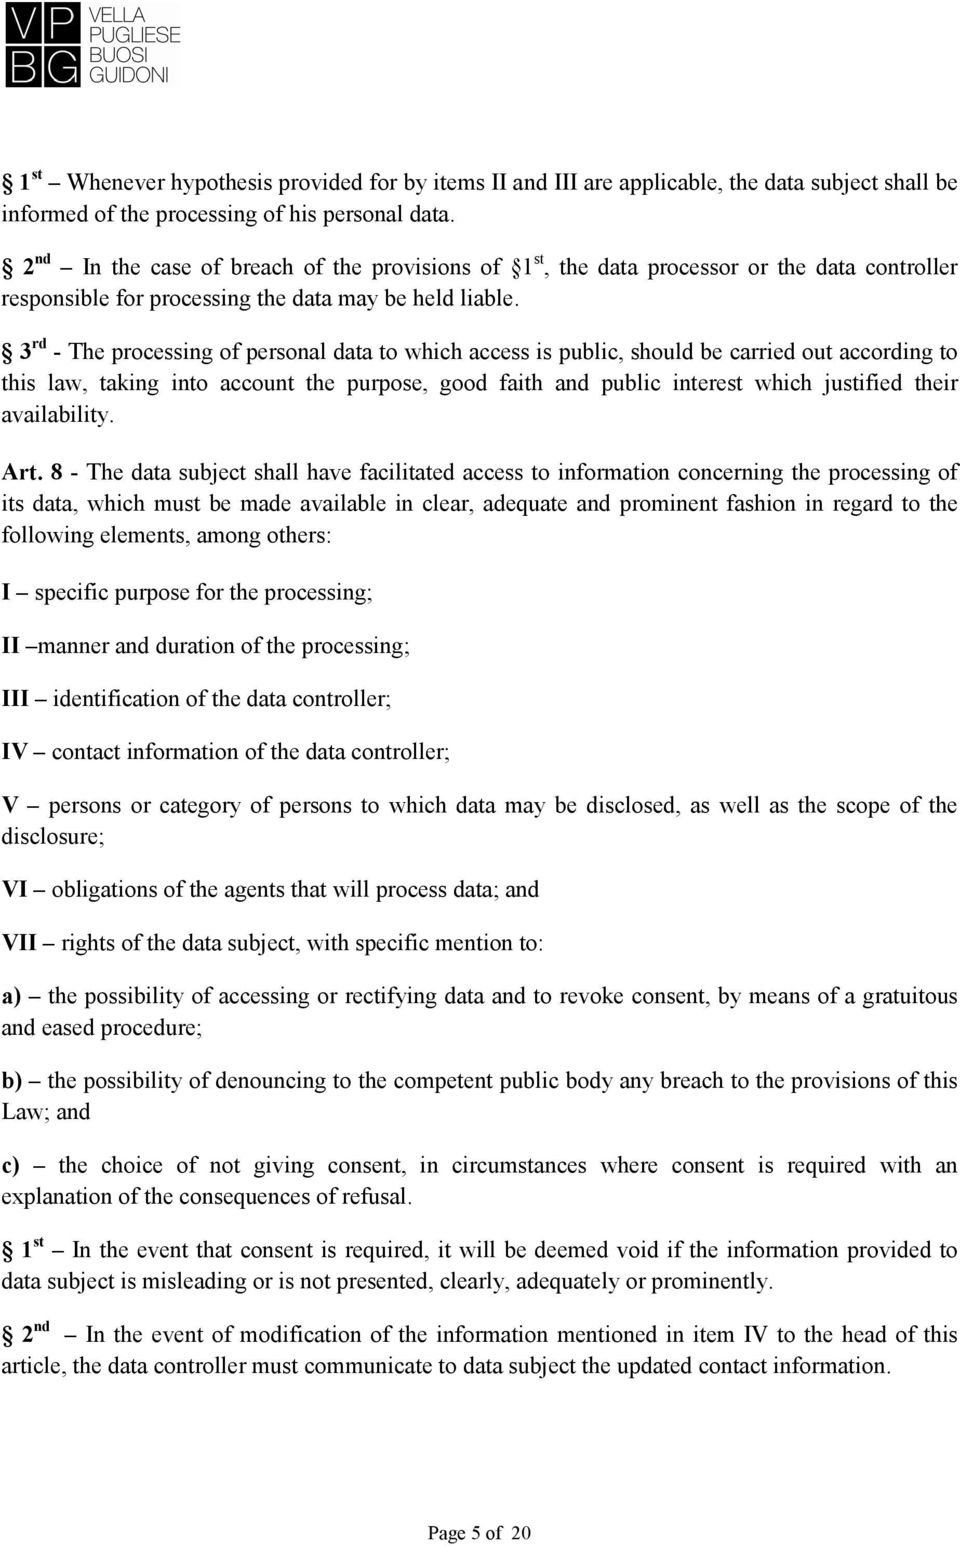 3 rd - The processing of personal data to which access is public, should be carried out according to this law, taking into account the purpose, good faith and public interest which justified their